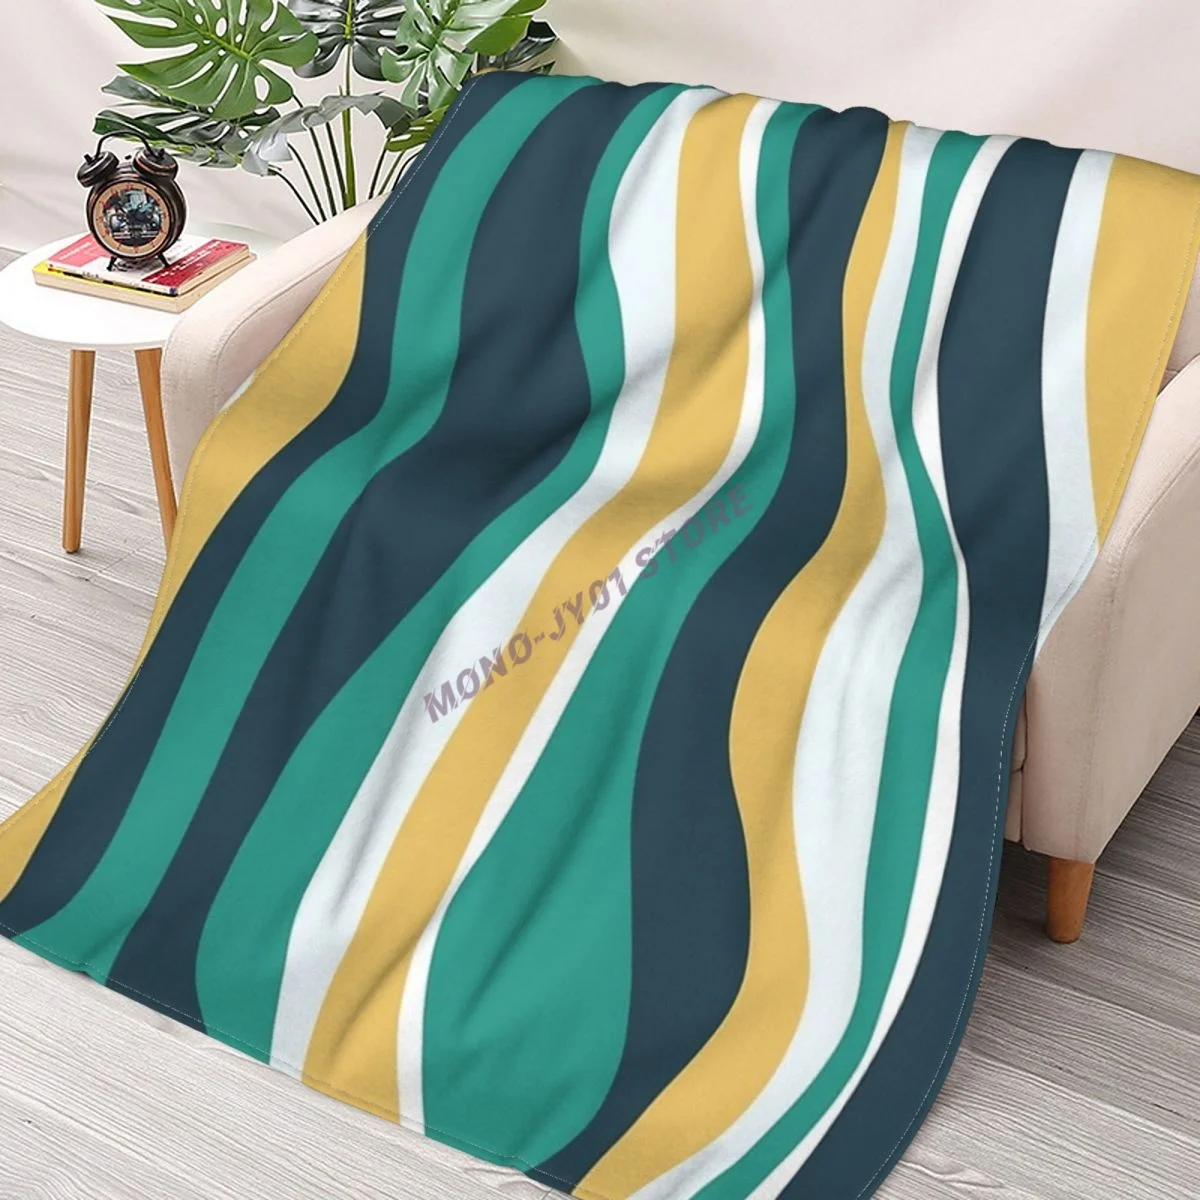 

Abstract Retro Groovy Lines Teal And Yellow Throw Blanket Sherpa Blanket cover Bedding soft Blankets